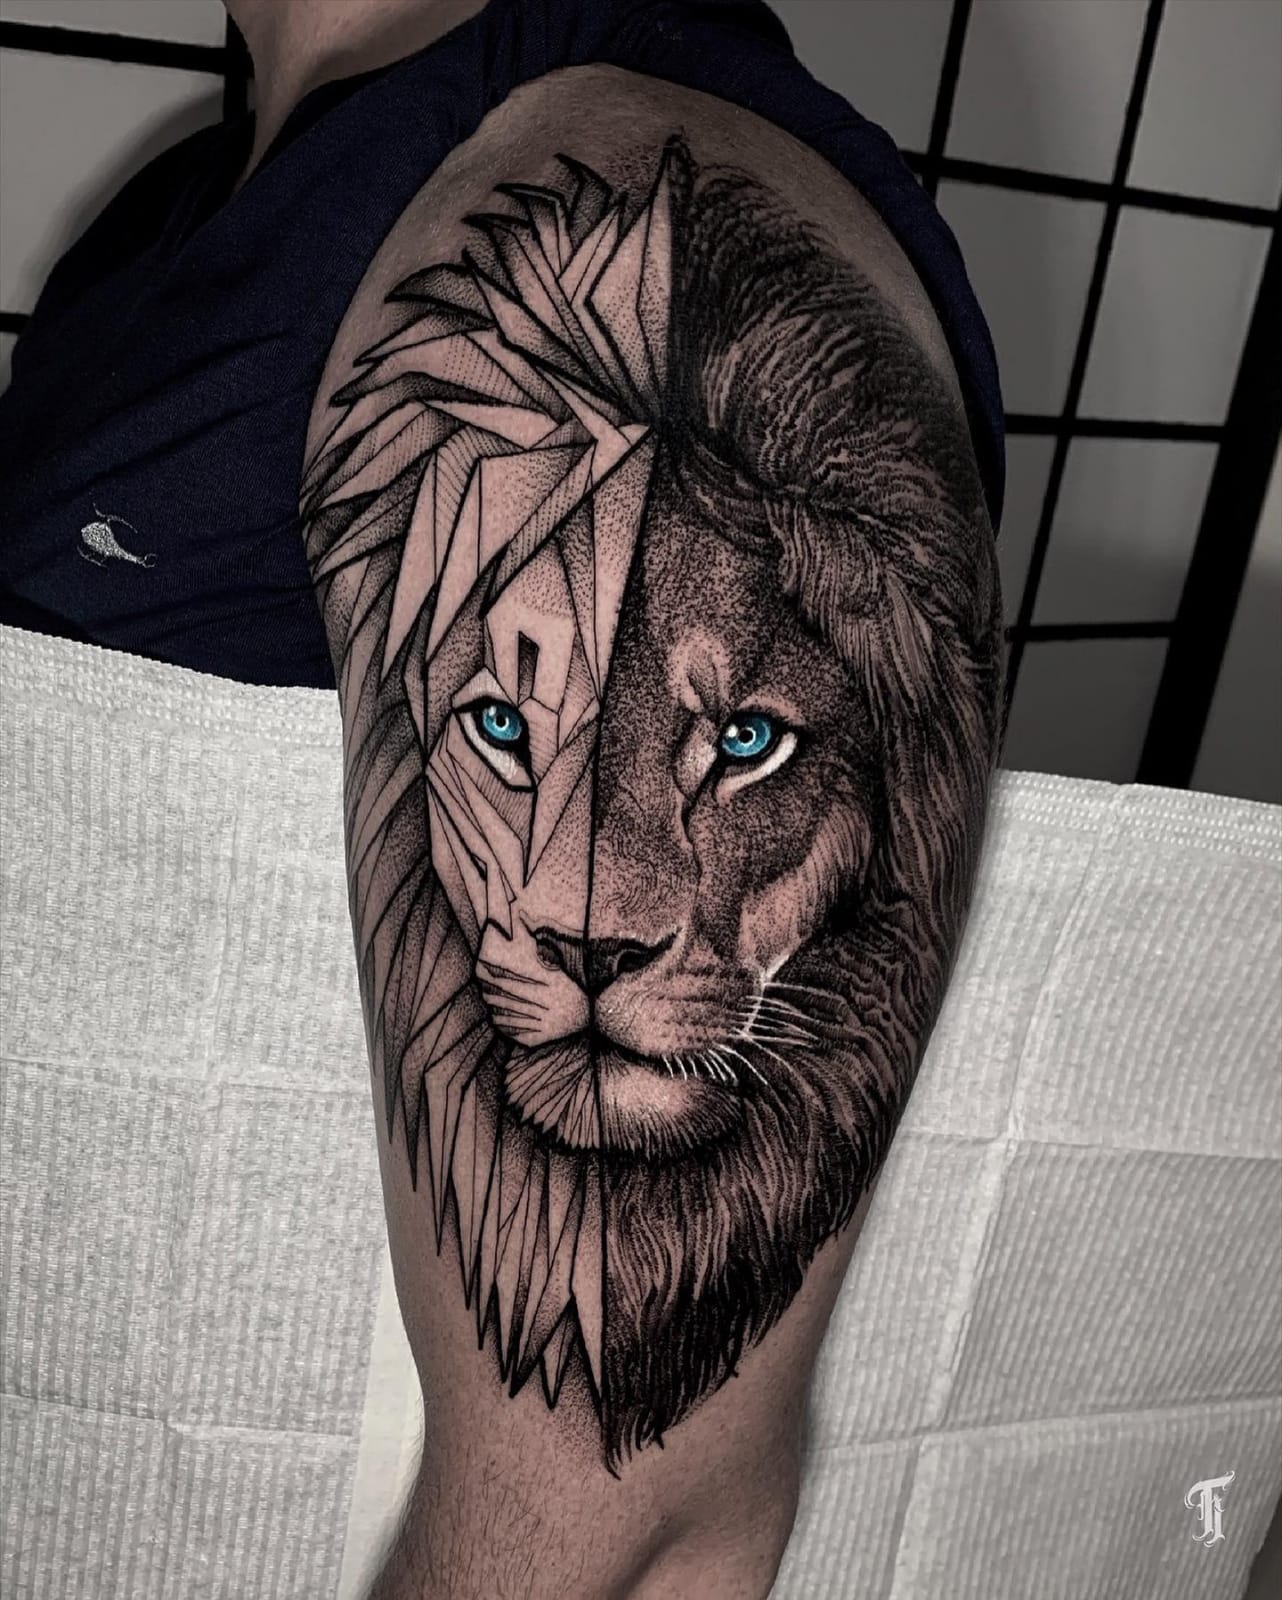 10+ Forearm Lion Tattoo Ideas That Will Blow Your Mind! - alexie